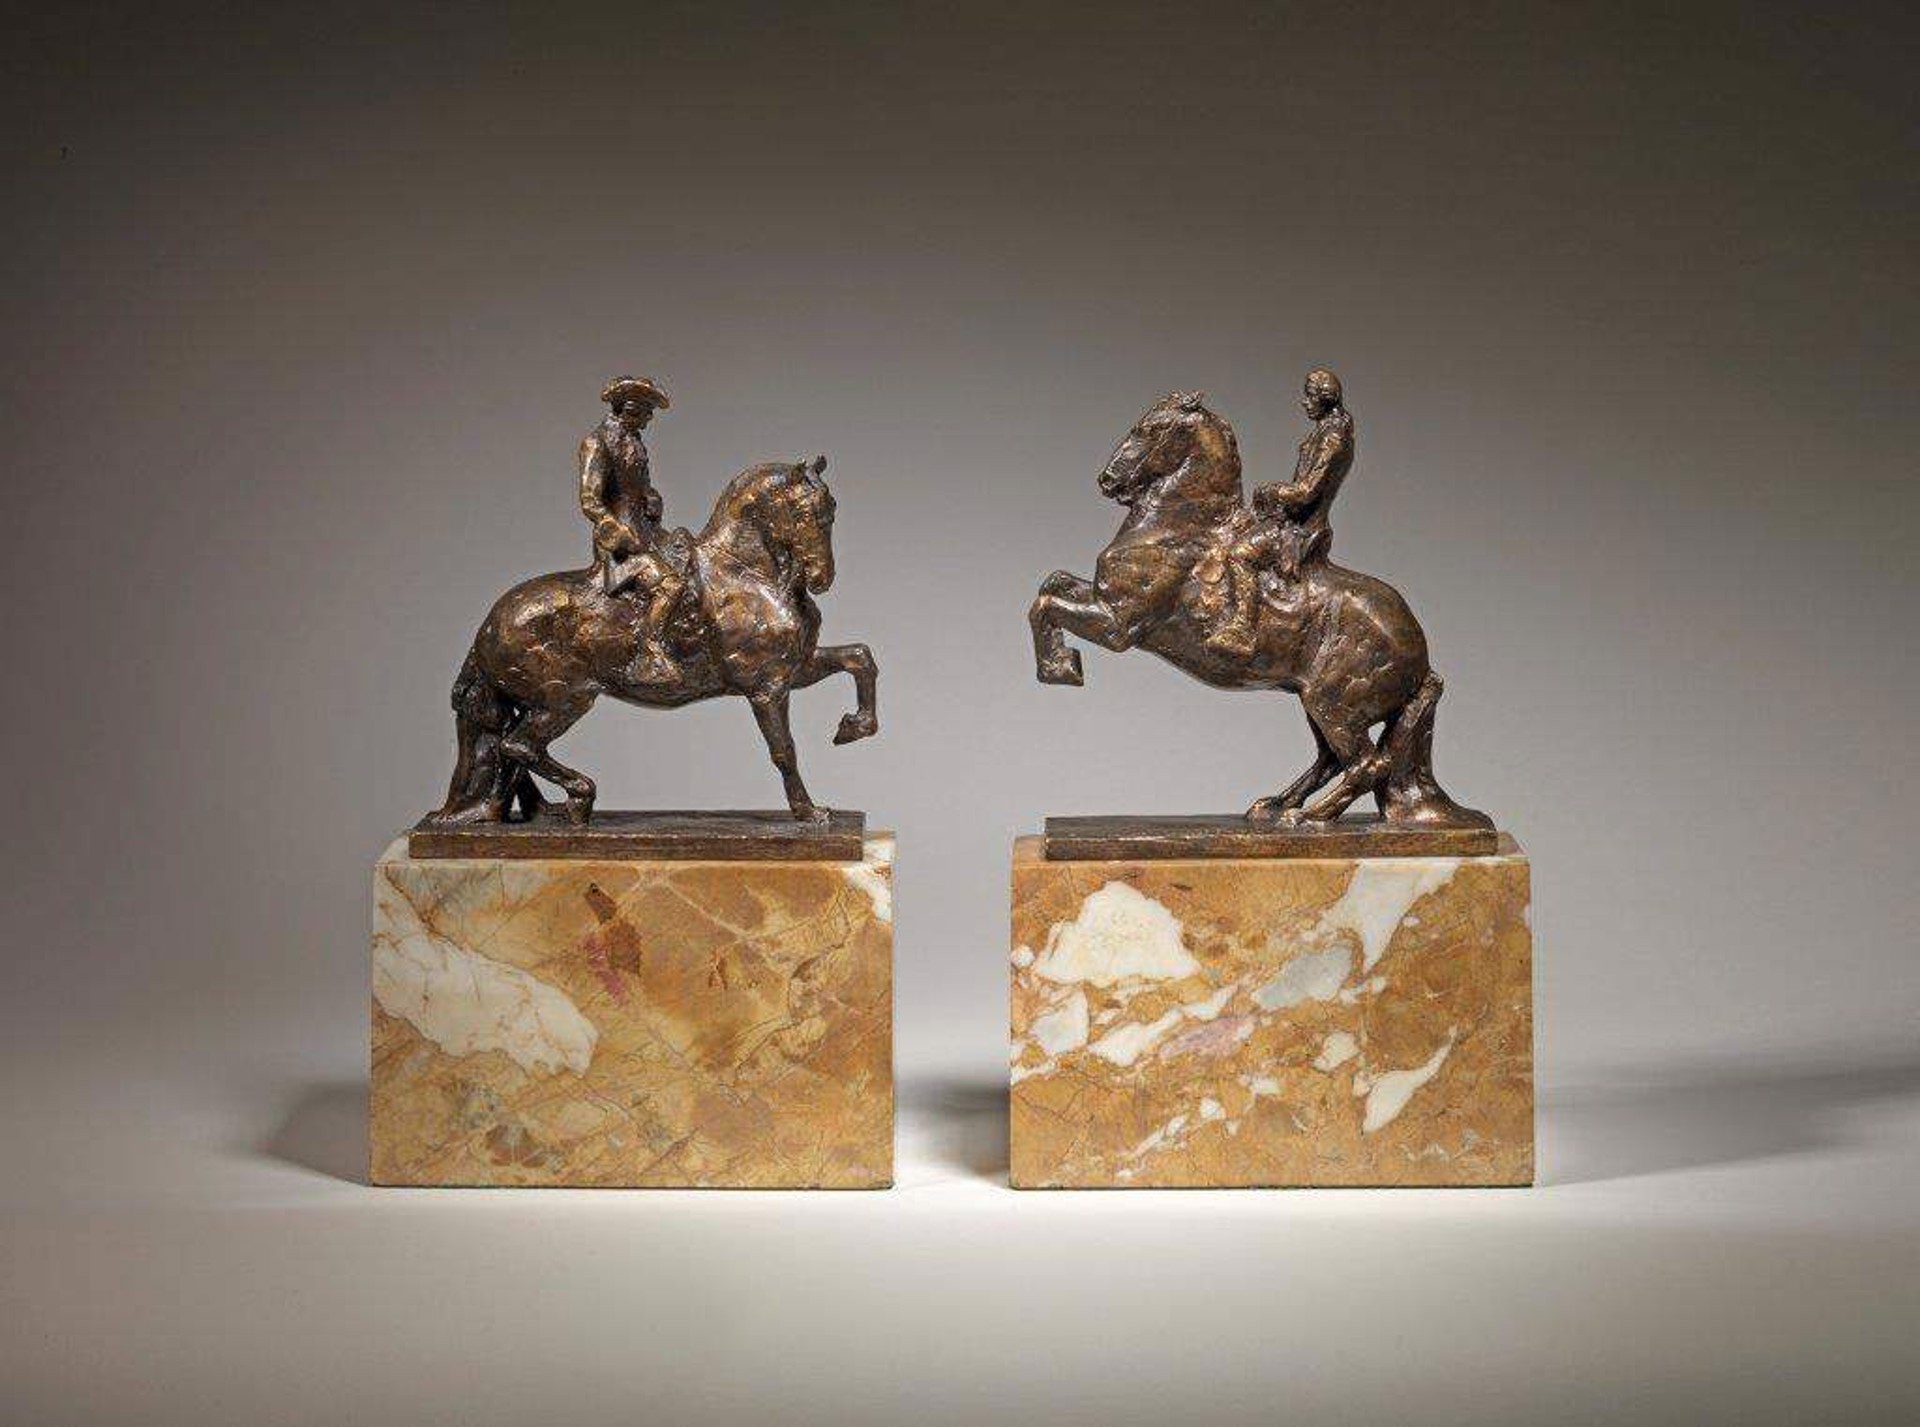 Portuguese Bullfighters, a pair, c. 1921 by Herbert Haseltine